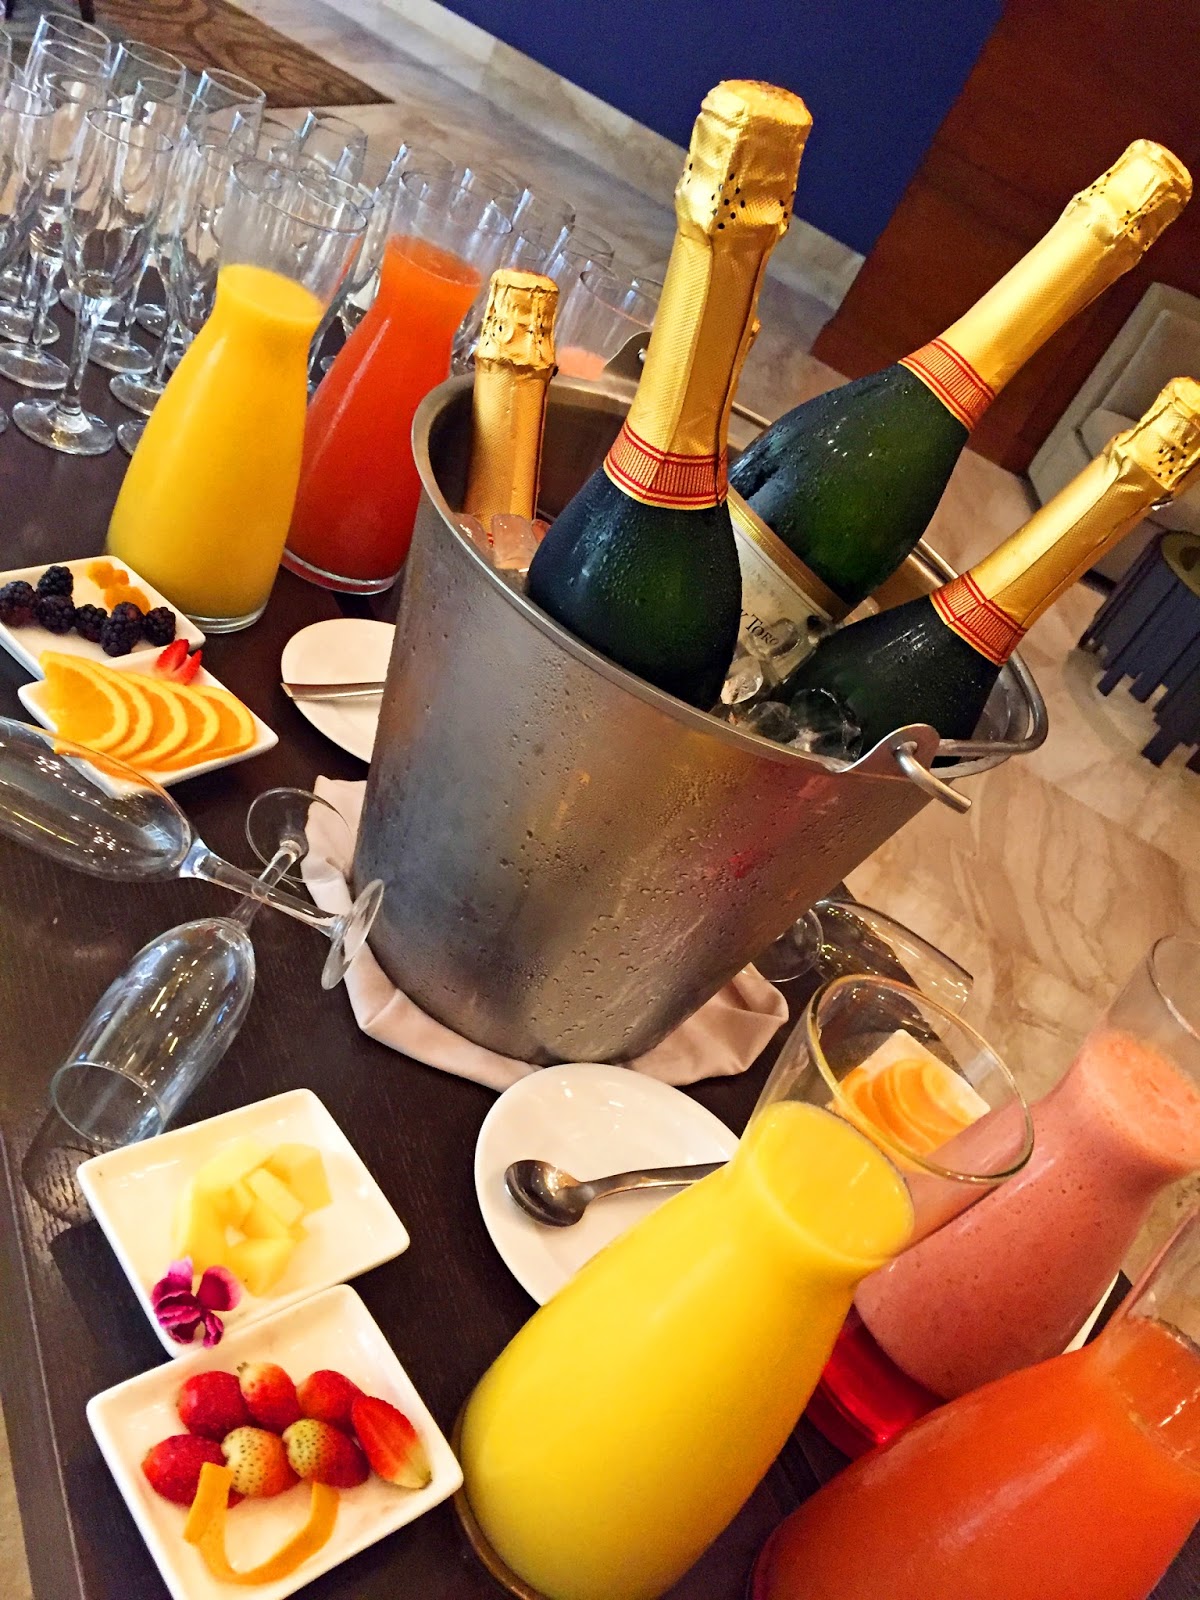 Enjoy your brunch with some delicious mimosas!